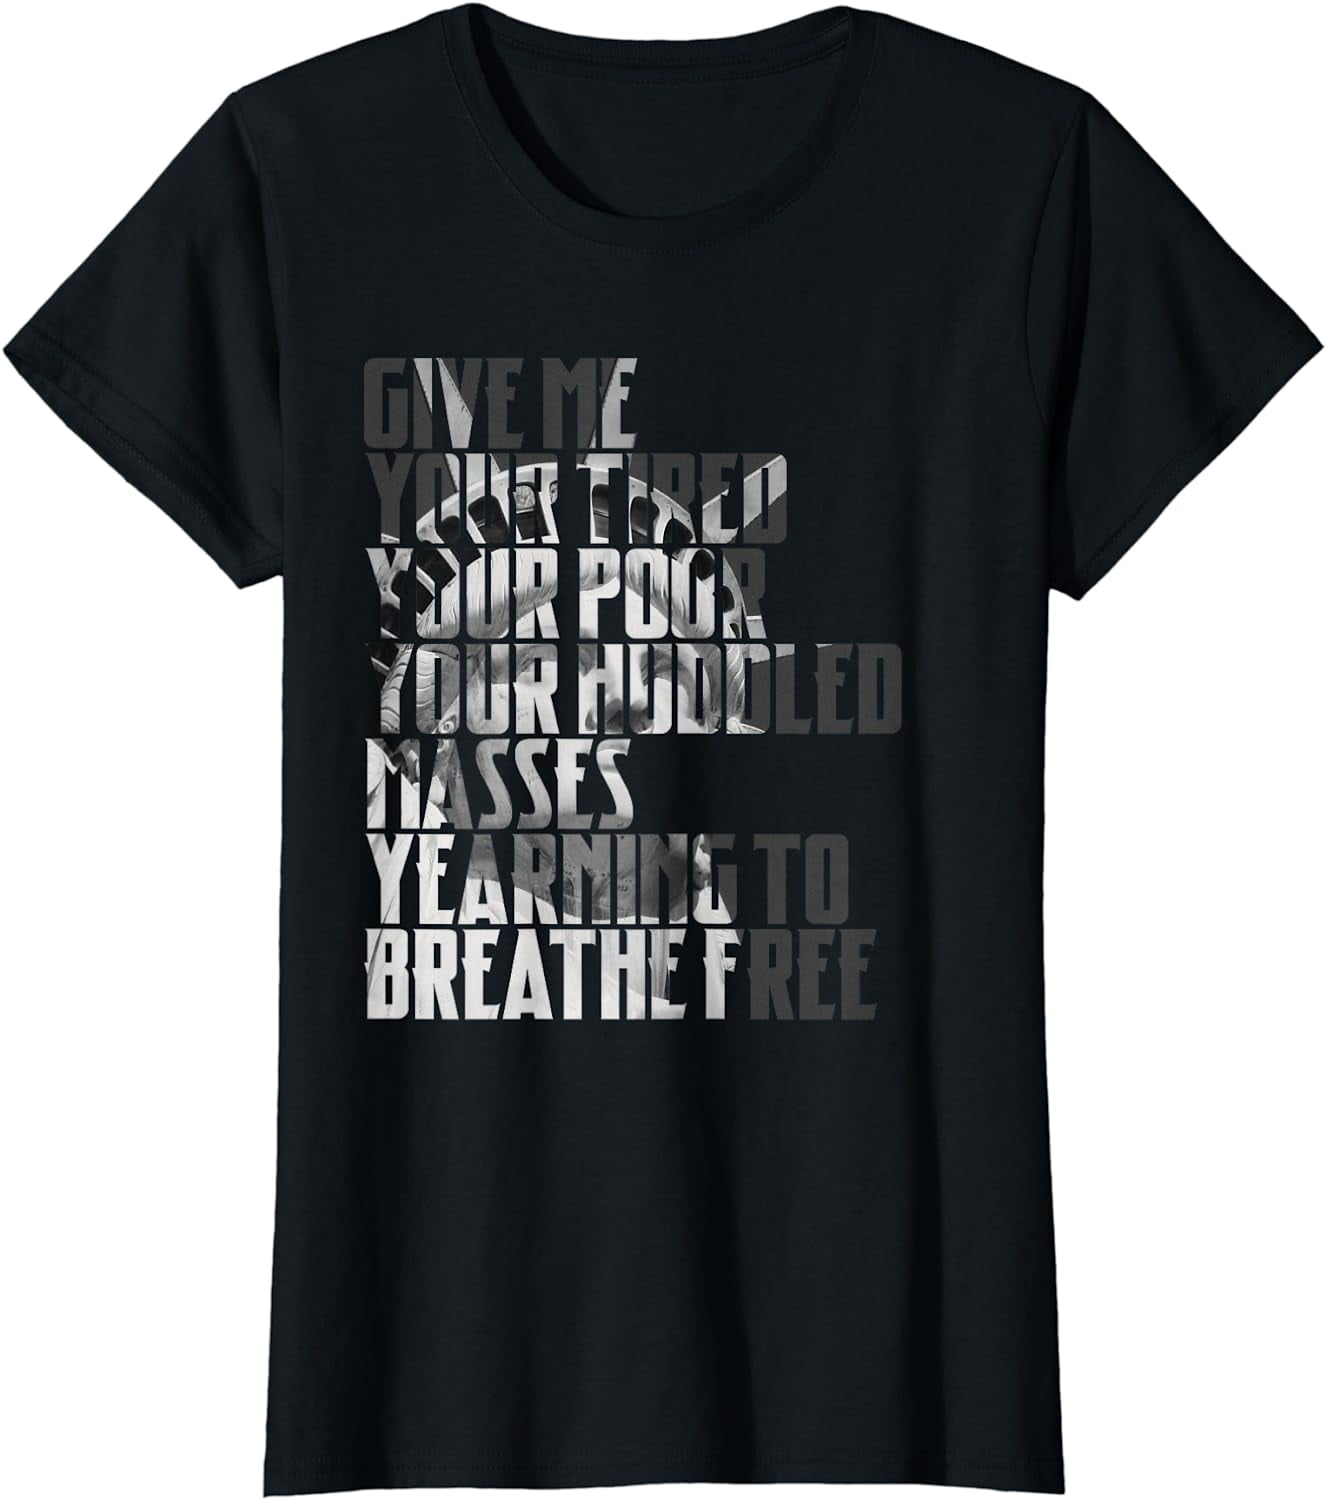 Give Me Your Tired Your Poor New York Statue of Liberty Art T-Shirt ...